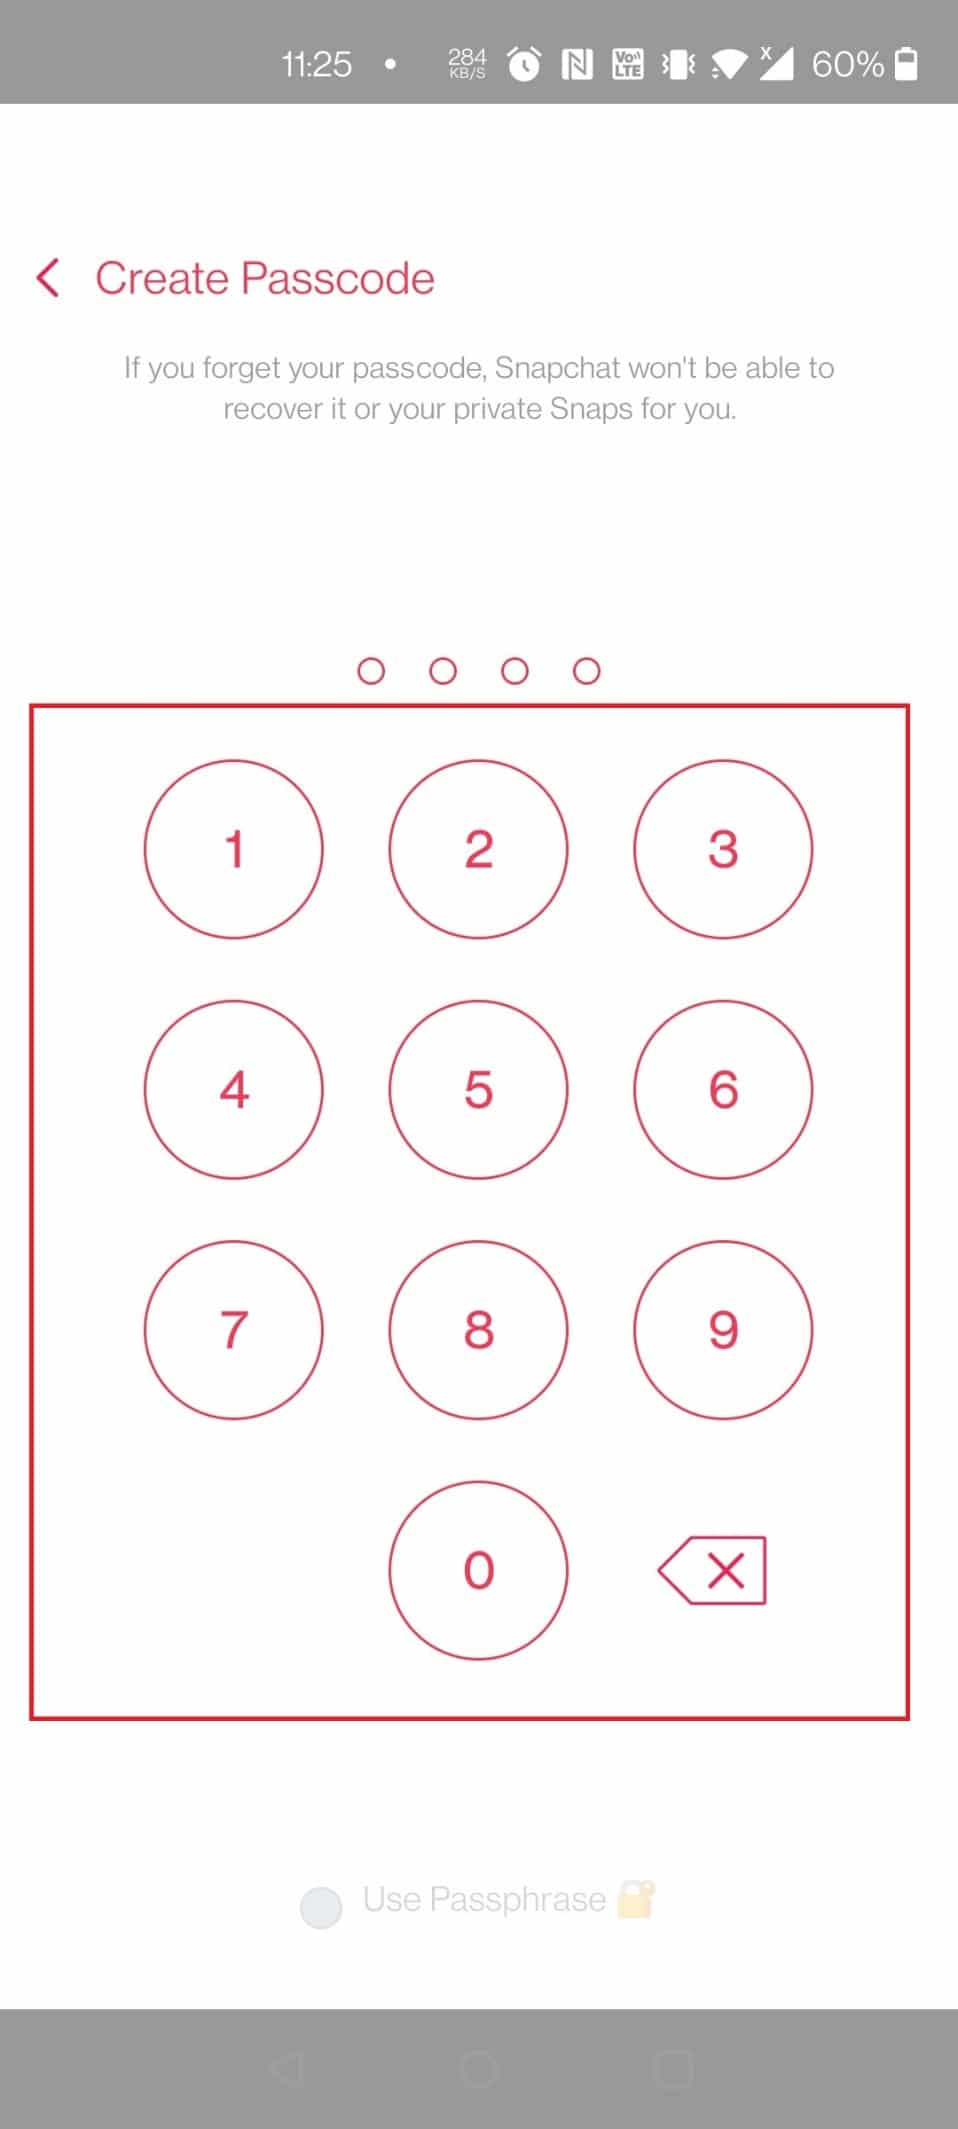 Create Passcode to activate the feature